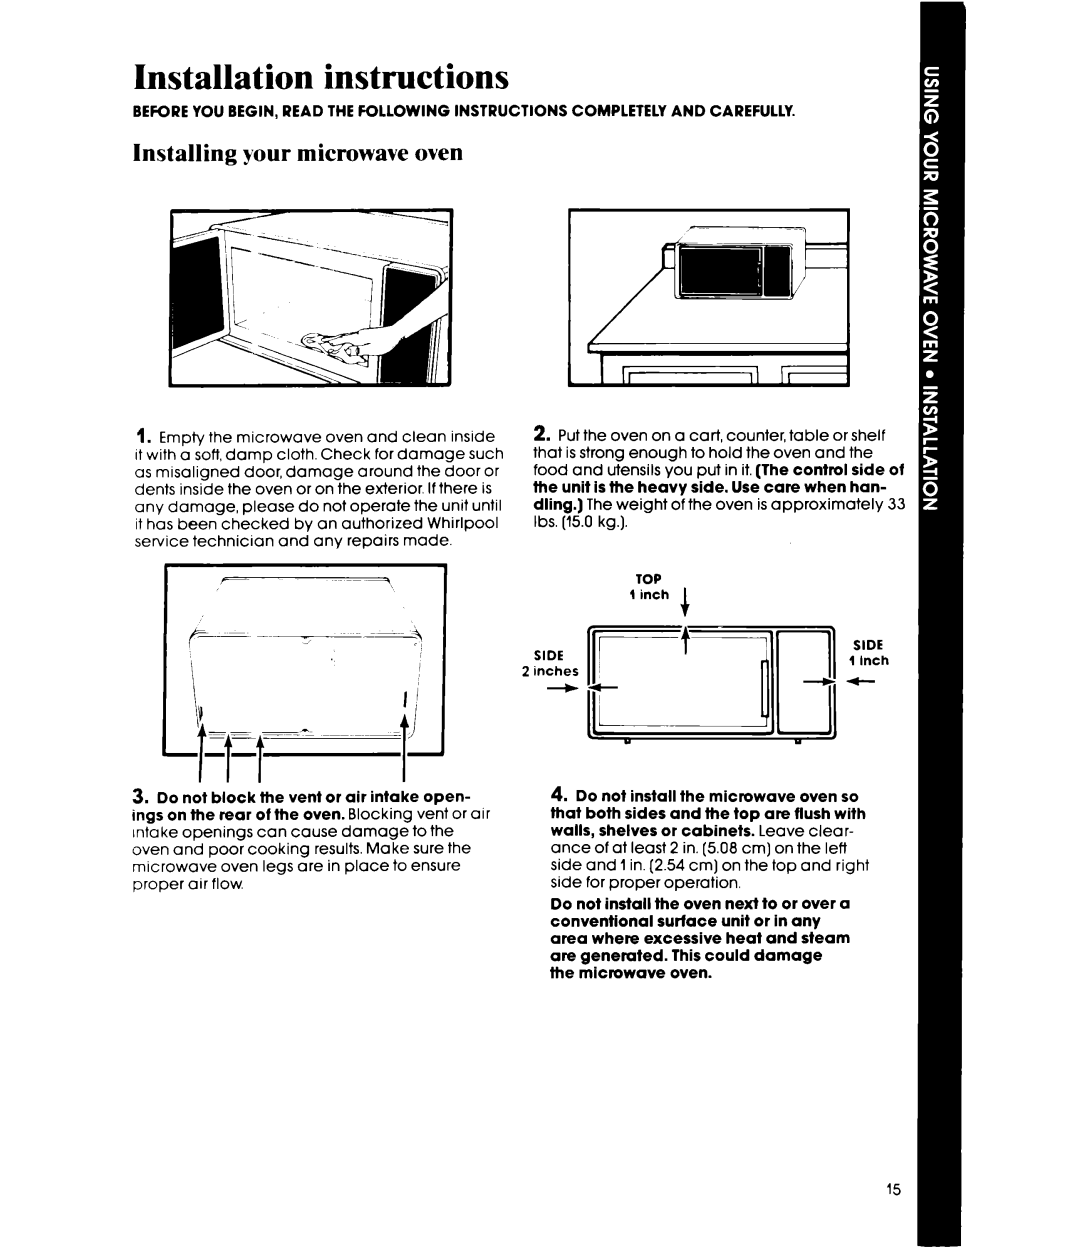 Whirlpool MW1500XP manual Installation instructions, Installing your microwave oven, Yzzzz= -I’i, tr t t t 